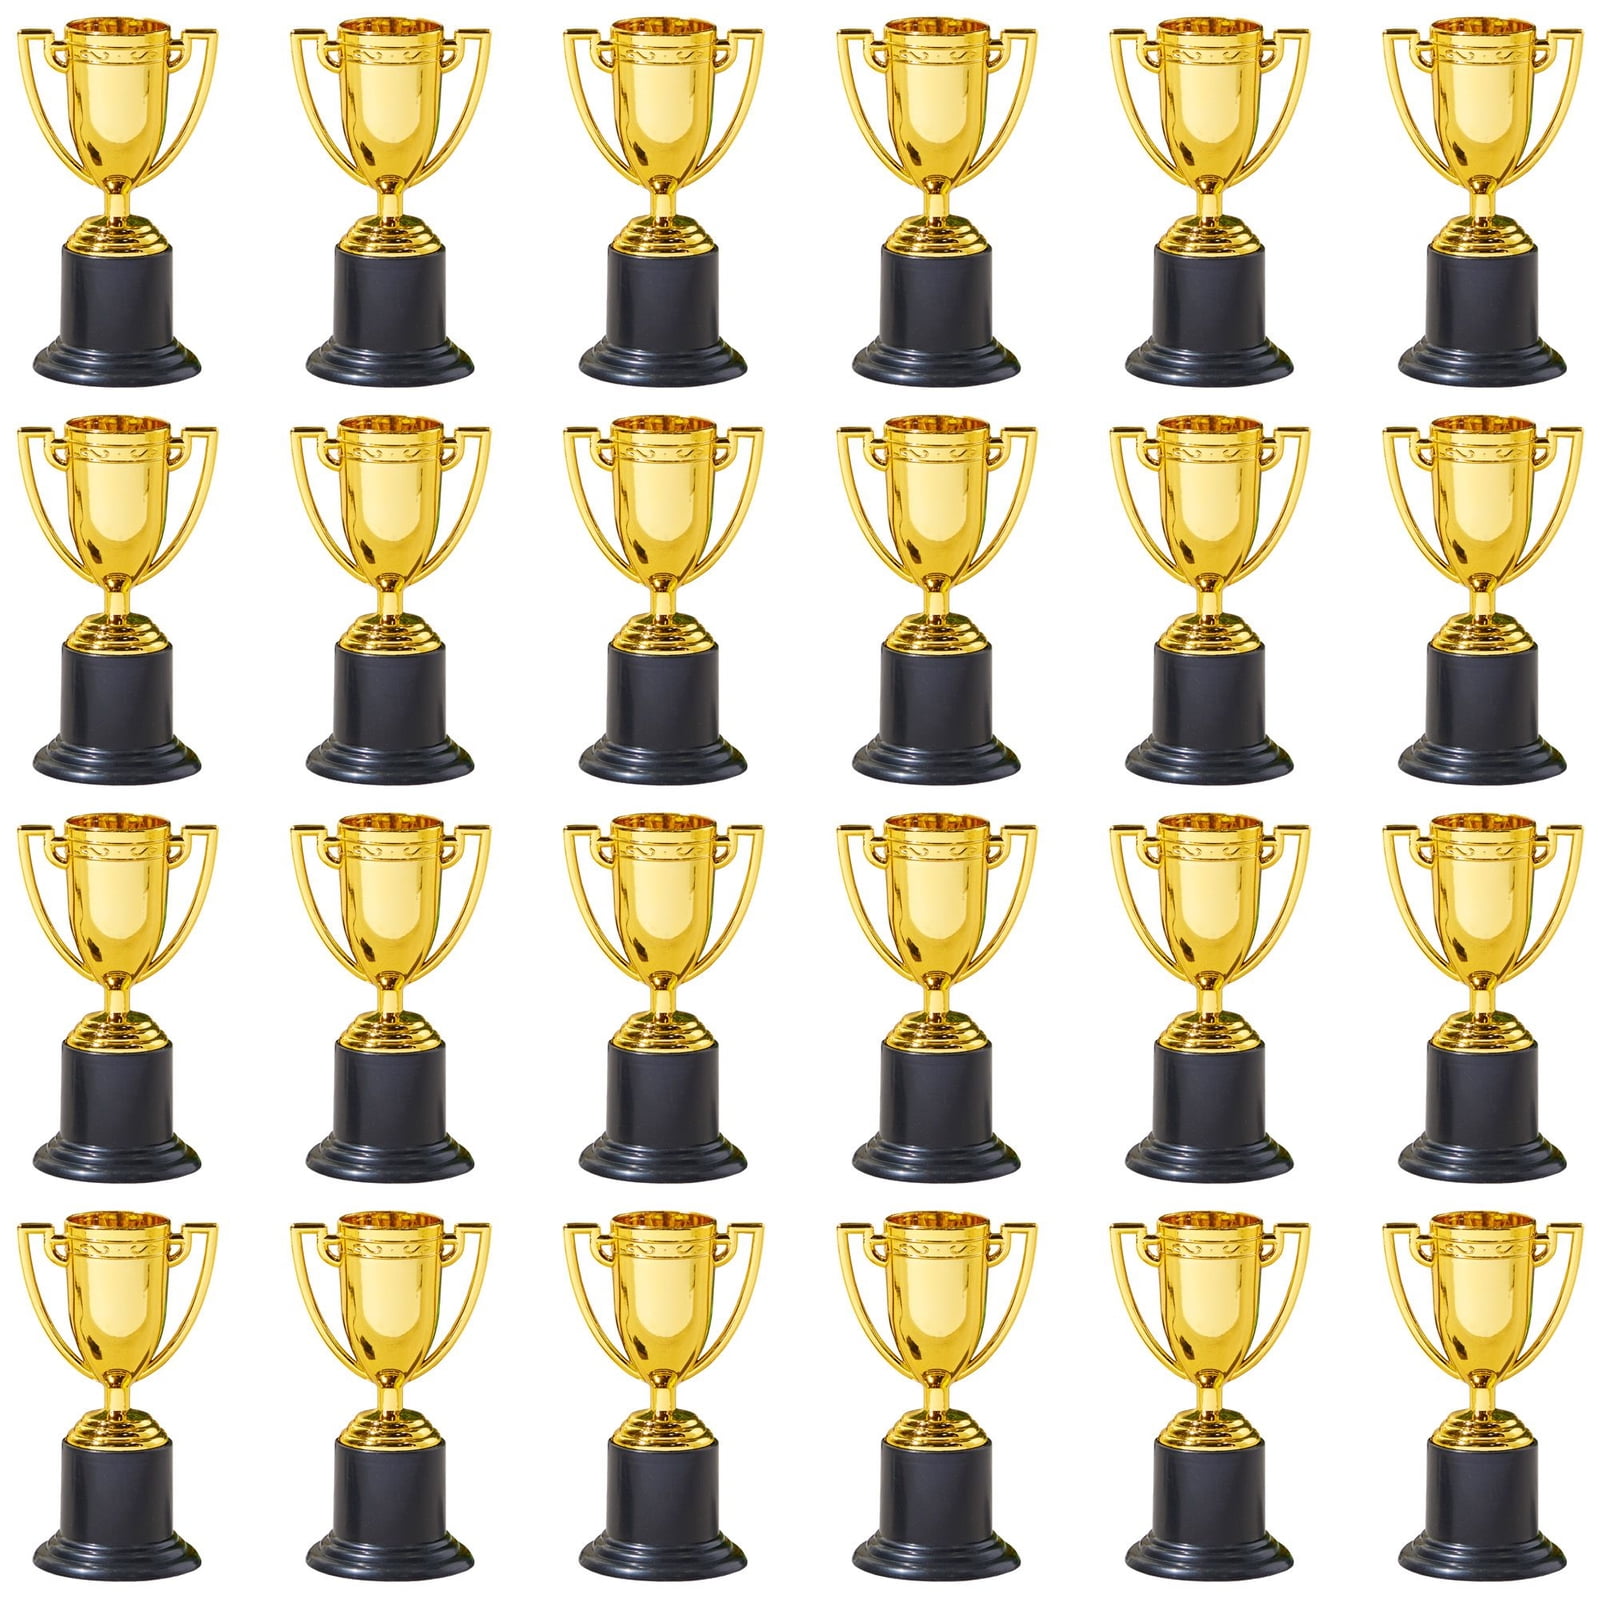 Max Fun 36 pcs Kids Childrens Gold Plastic Winner Award Medals Trophies Set for Sports Celebration Party Favors Competitions